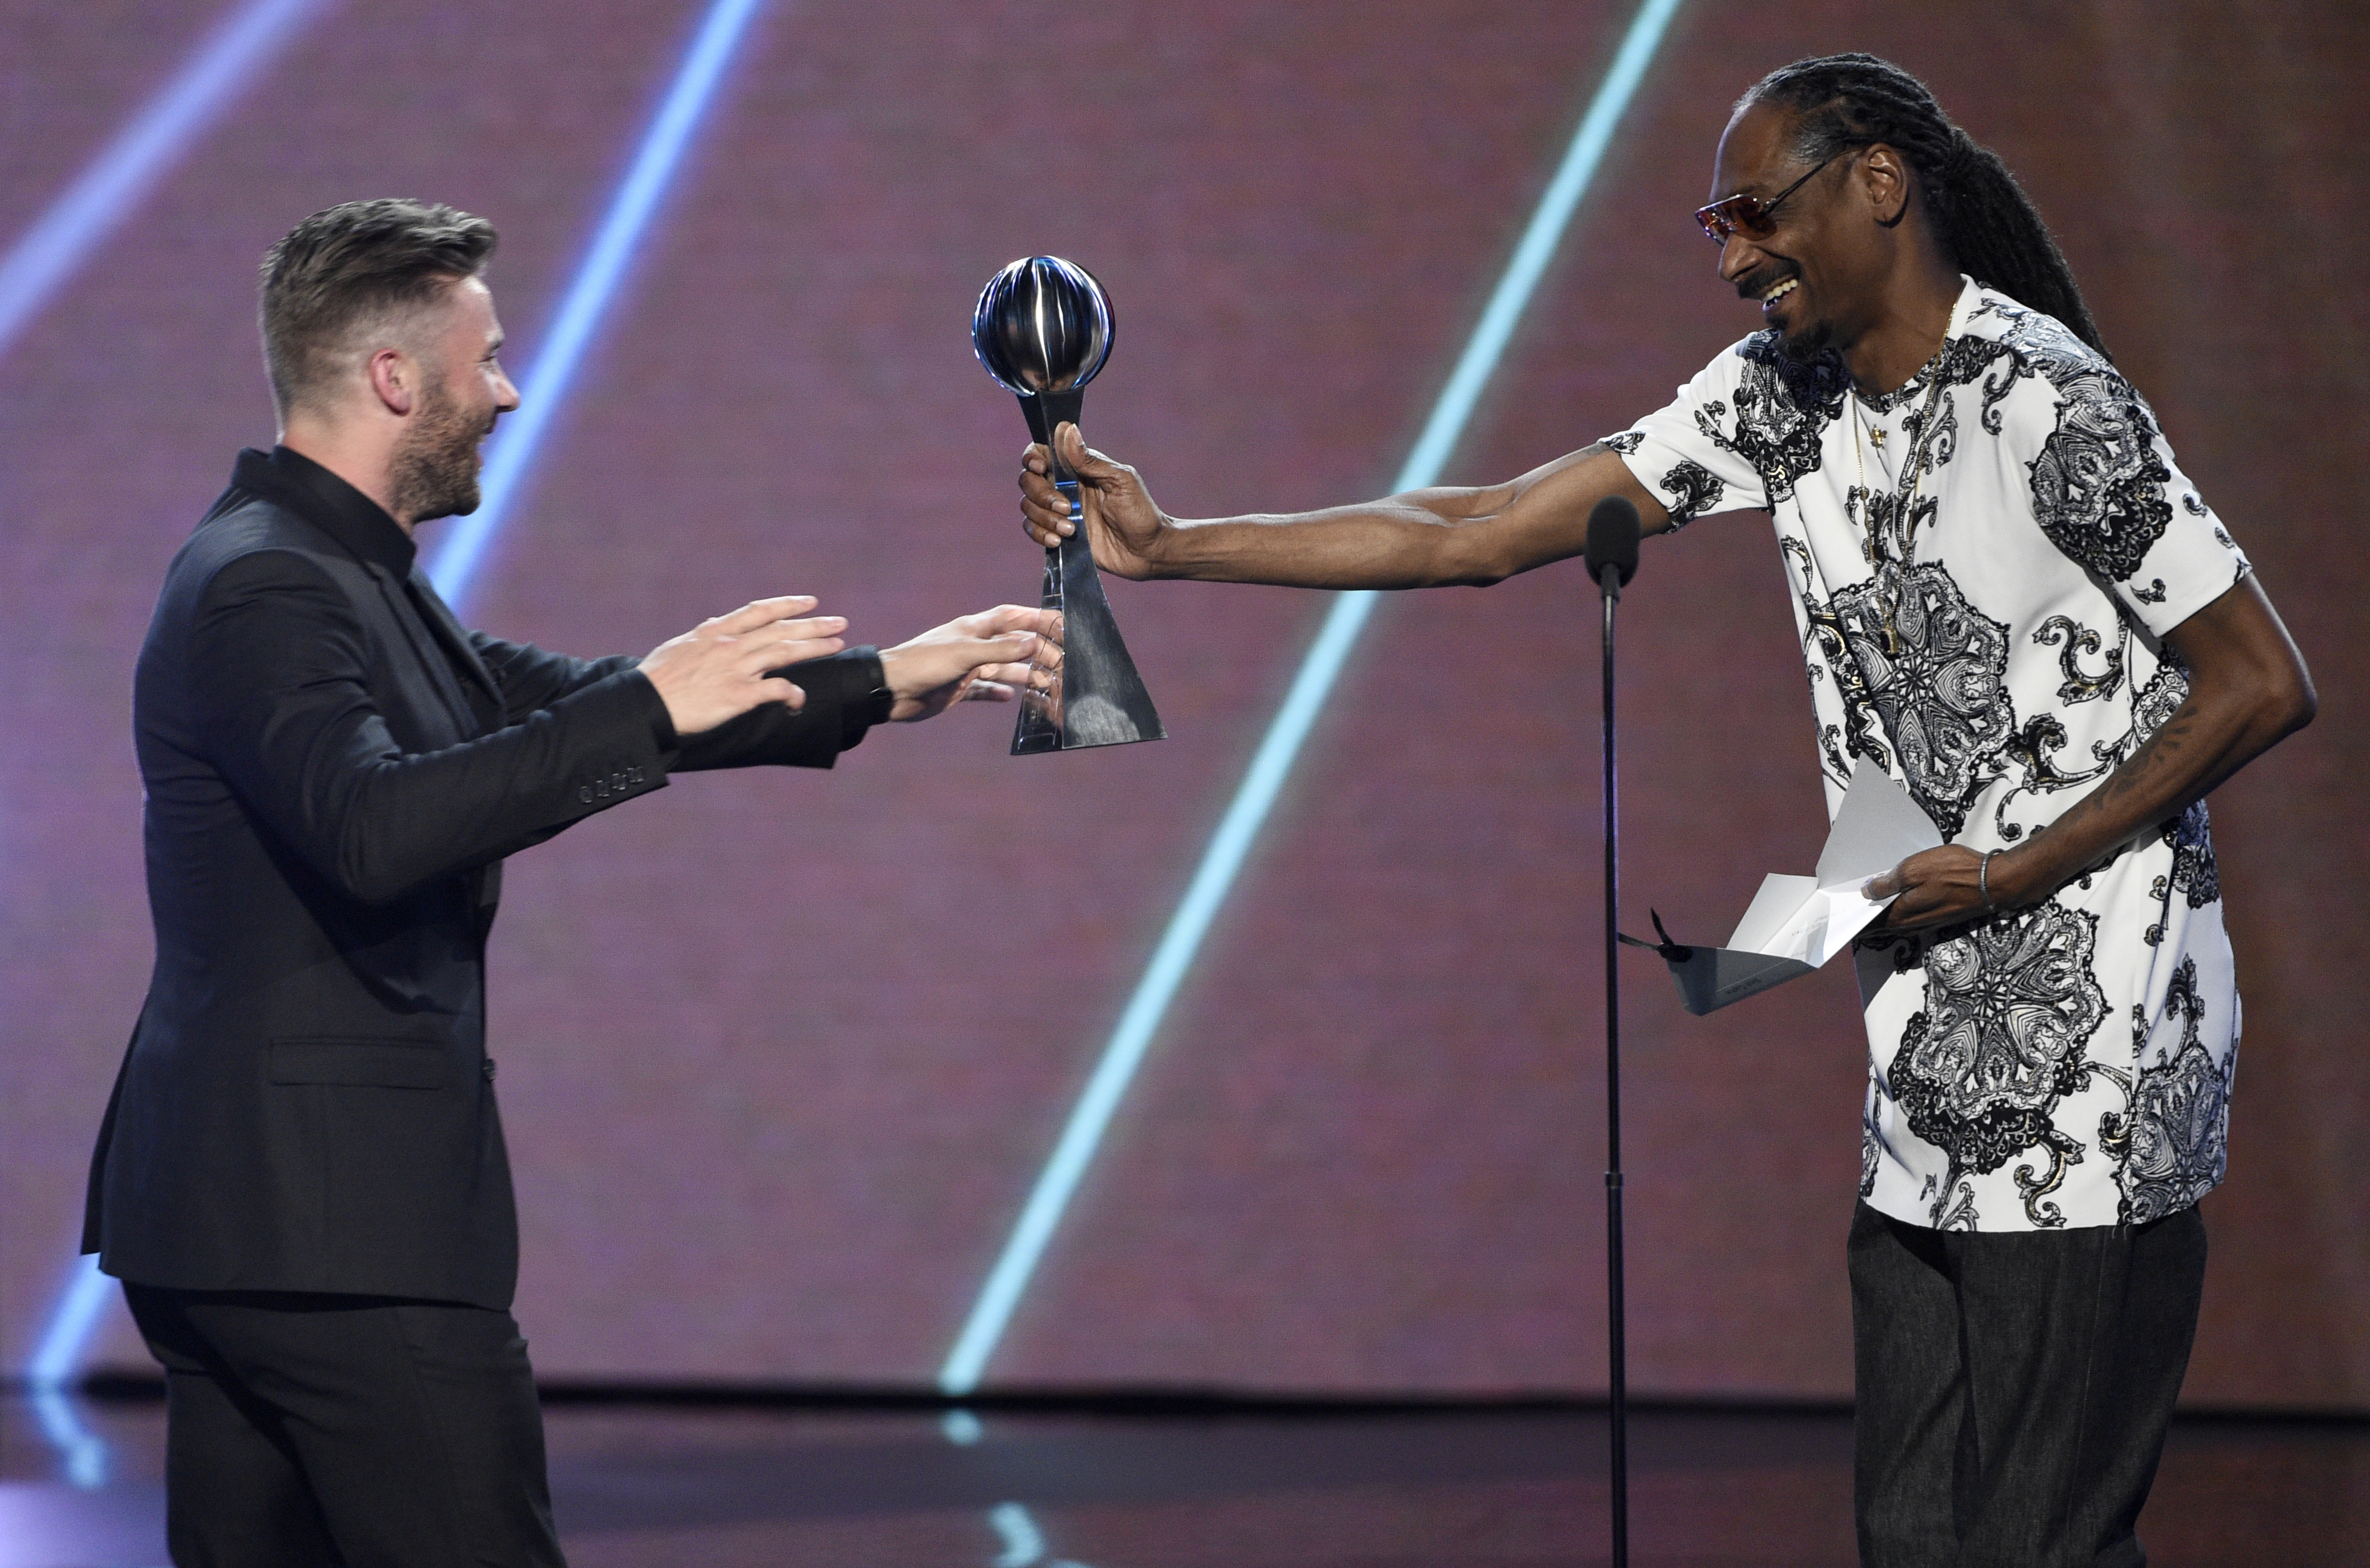 Snoop Dogg, right, presents NFL football player Julian Edelman, of the New England Patriots, the award for best game for the Patriots Vs. Falcons at Super Bowl LI at the ESPYS at the Microsoft Theater on Wednesday, July 12, 2017, in Los Angeles. (Photo by Chris Pizzello/Invision/AP)